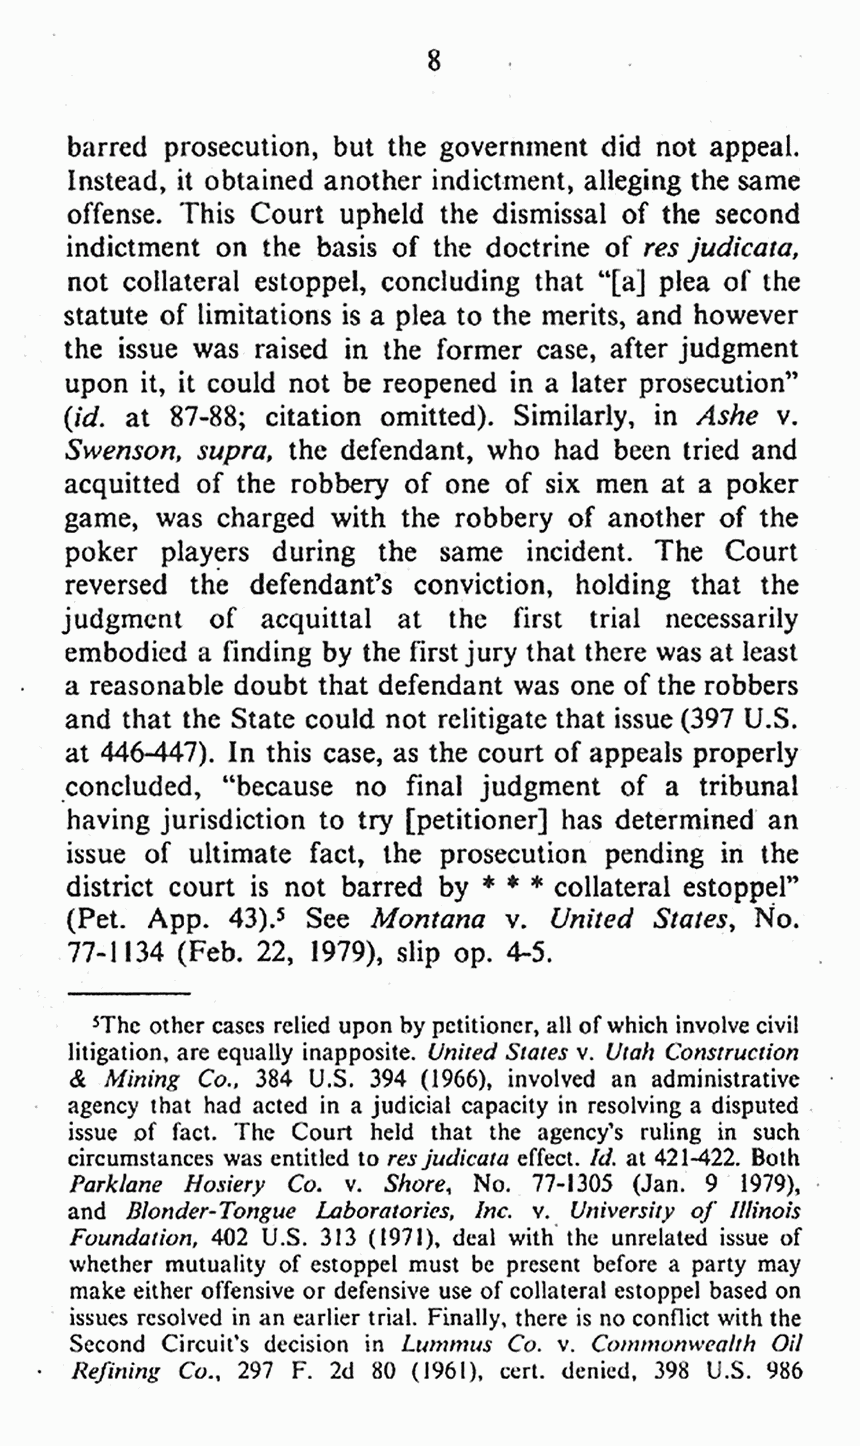 February 1979: Supreme Court of the United States, On Petition for Writ of Certiorari to the U. S. Court of Appeals for the 4th Circuit: Brief for the United States in Opposition, p. 8 of 9